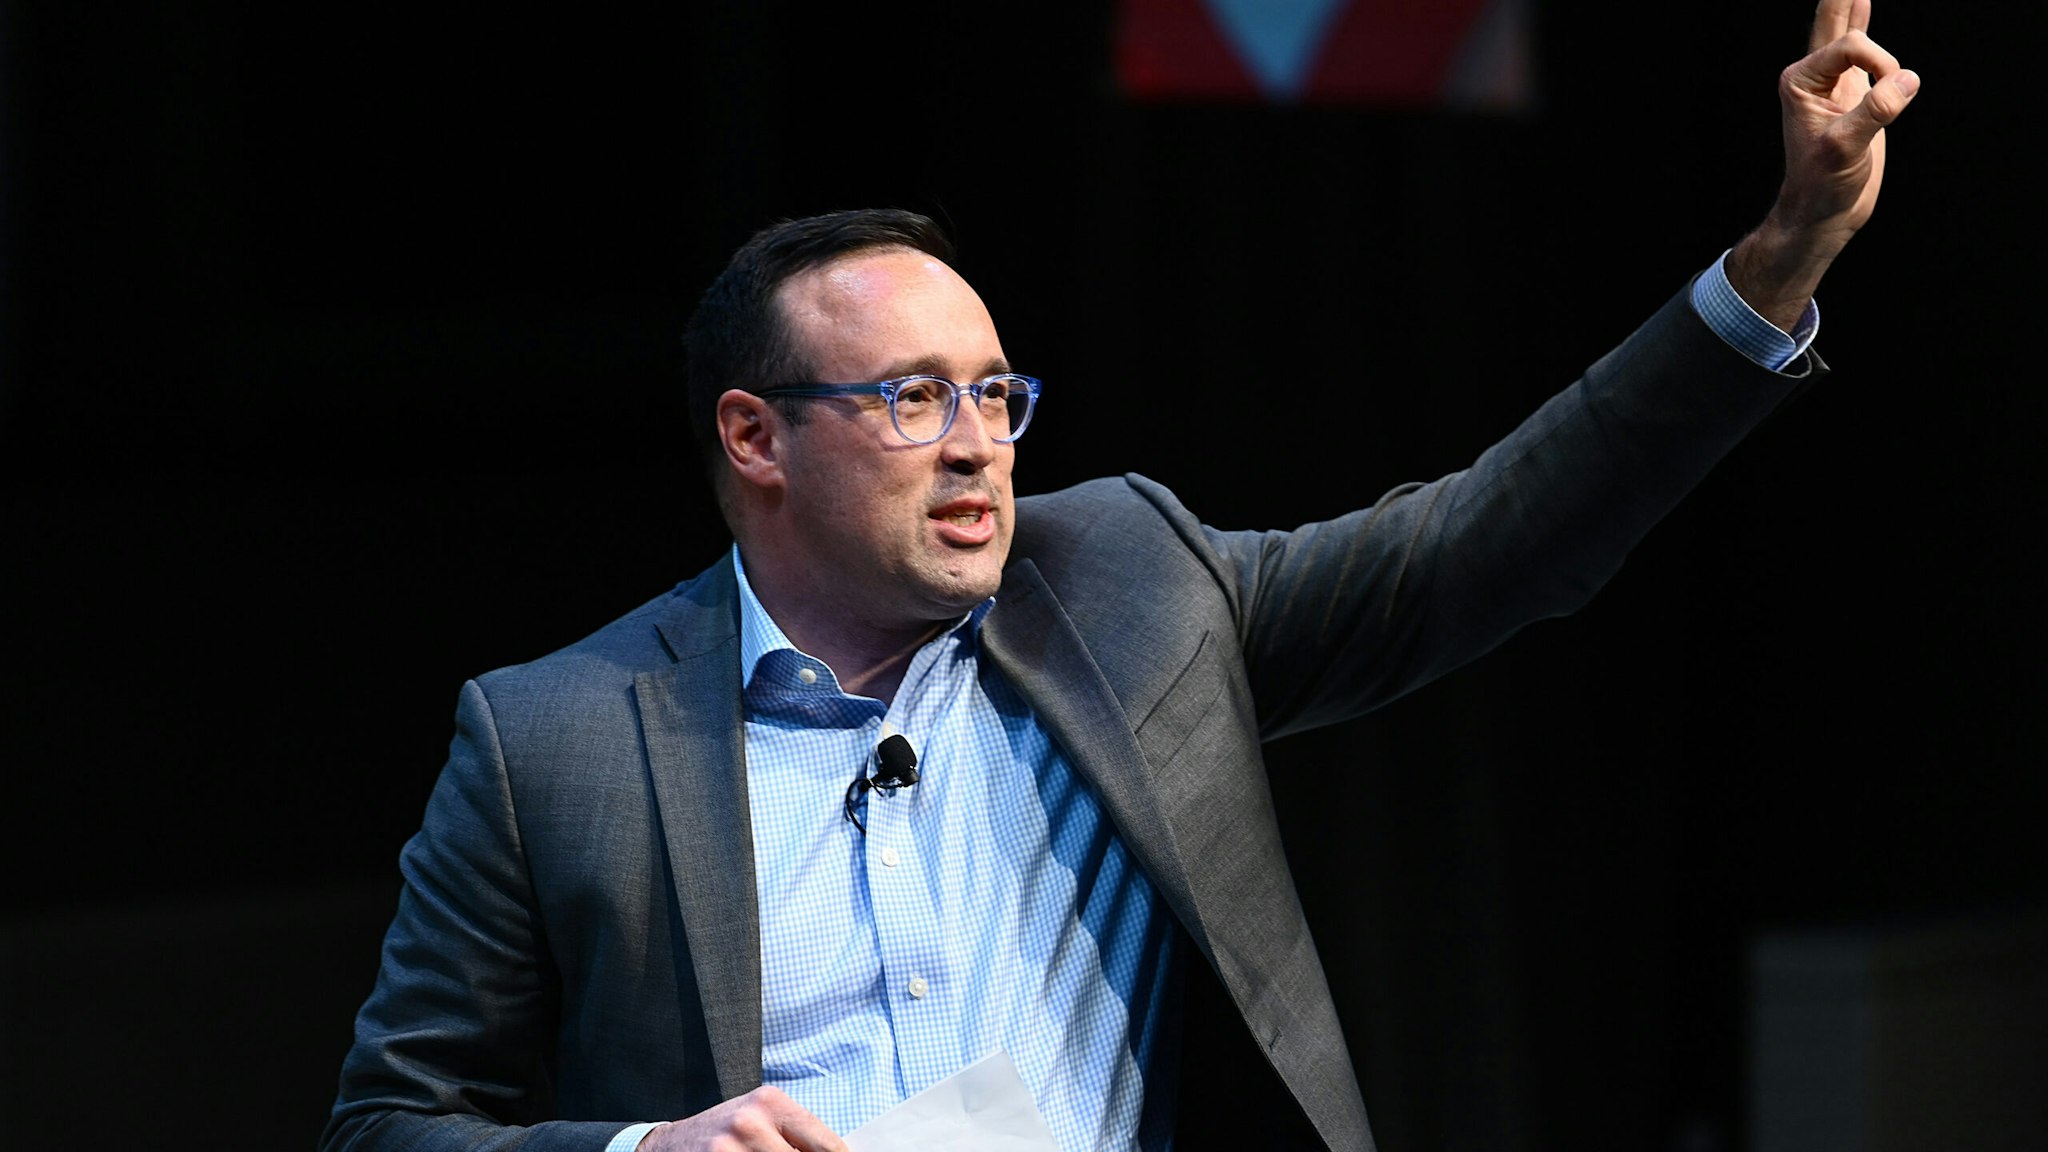 NEW YORK, NEW YORK - MARCH 05: Chris Cillizza speaks onstage during CNN Experience on March 05, 2020 in New York City.